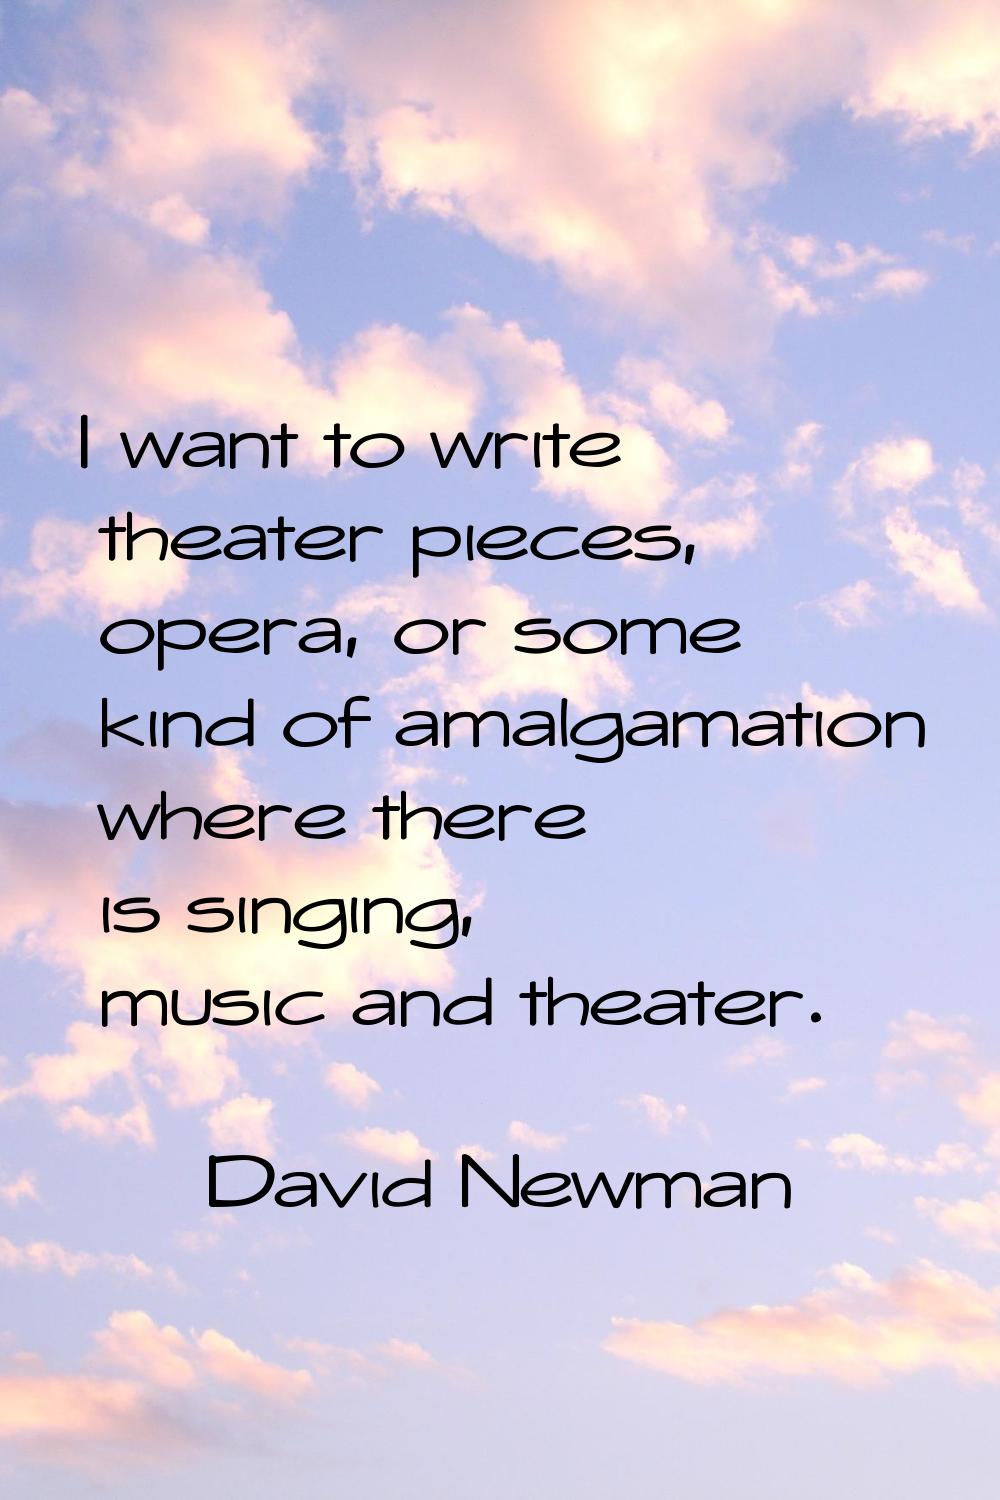 I want to write theater pieces, opera, or some kind of amalgamation where there is singing, music a